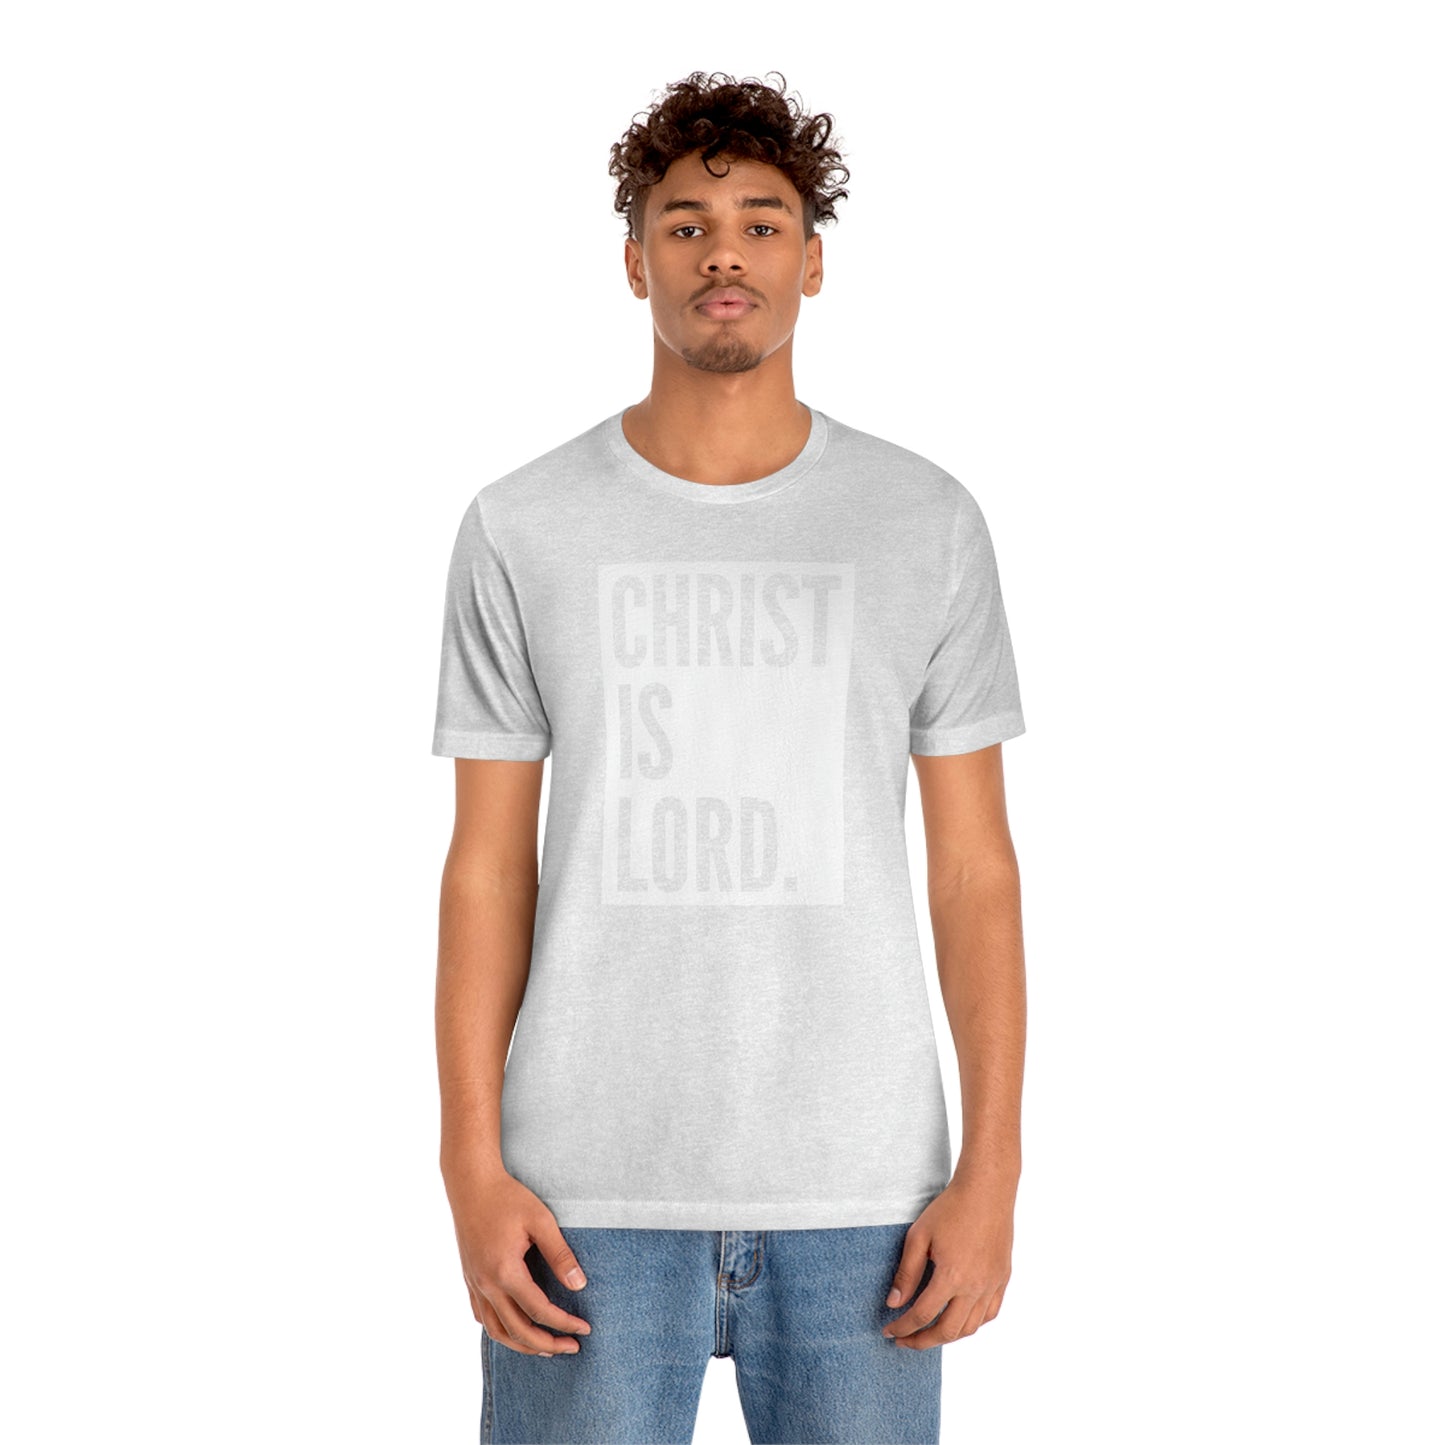 Gospel Affiliated Christ Is Lord Unisex Jersey Short Sleeve Tee